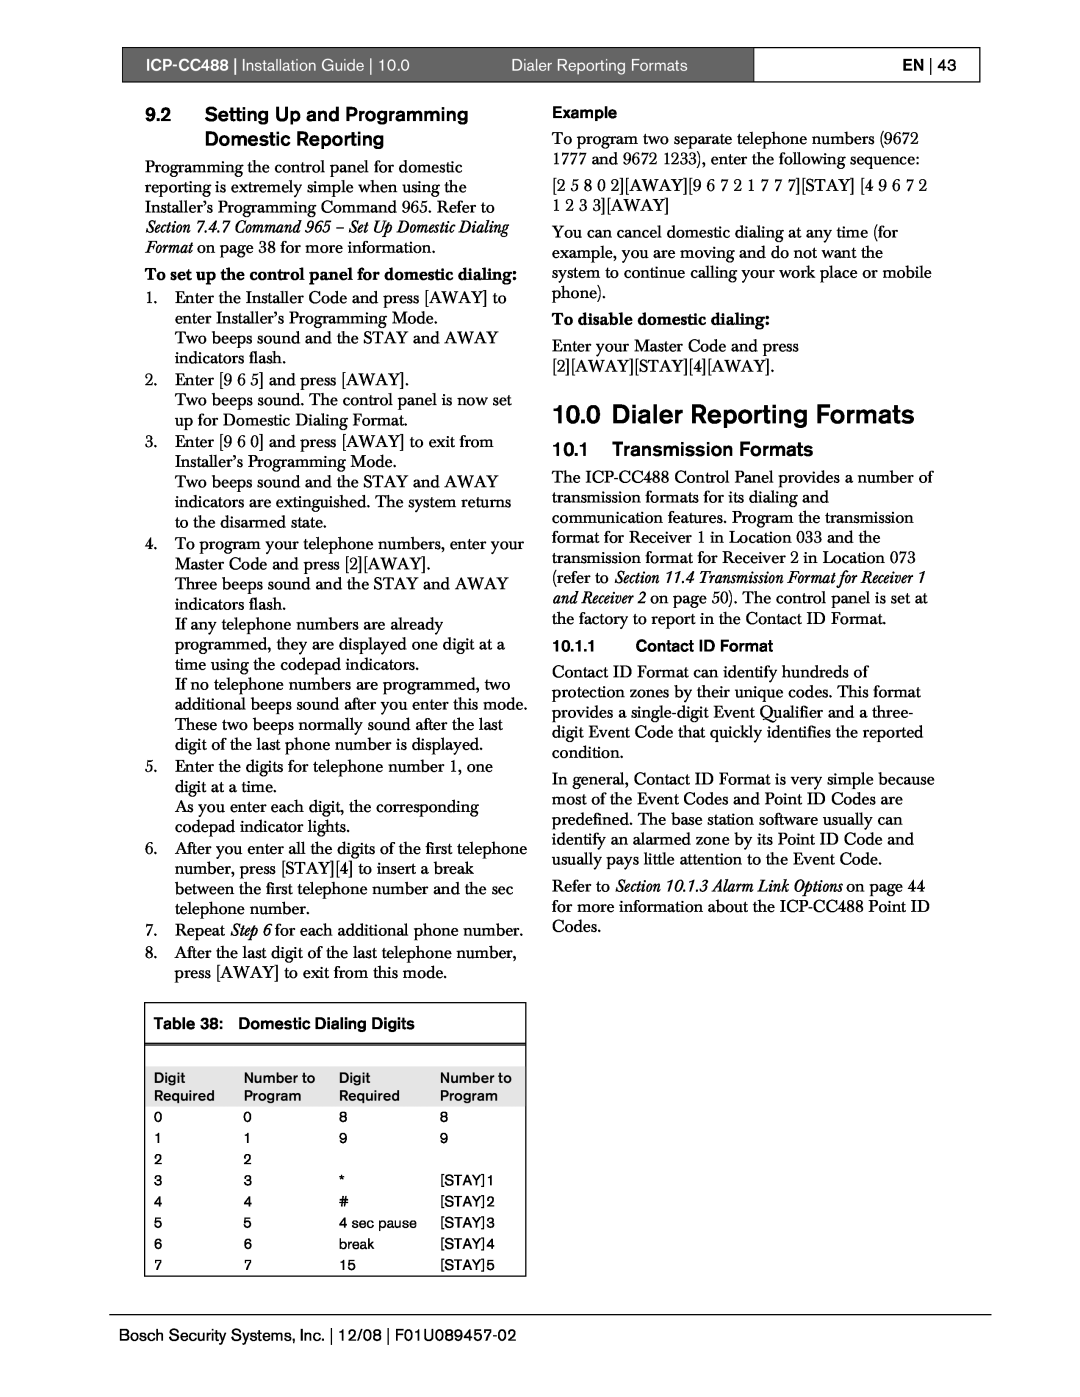 Bosch Appliances ICP-CC488 manual 10.0Dialer Reporting Formats, 9.2Setting Up and Programming Domestic Reporting 